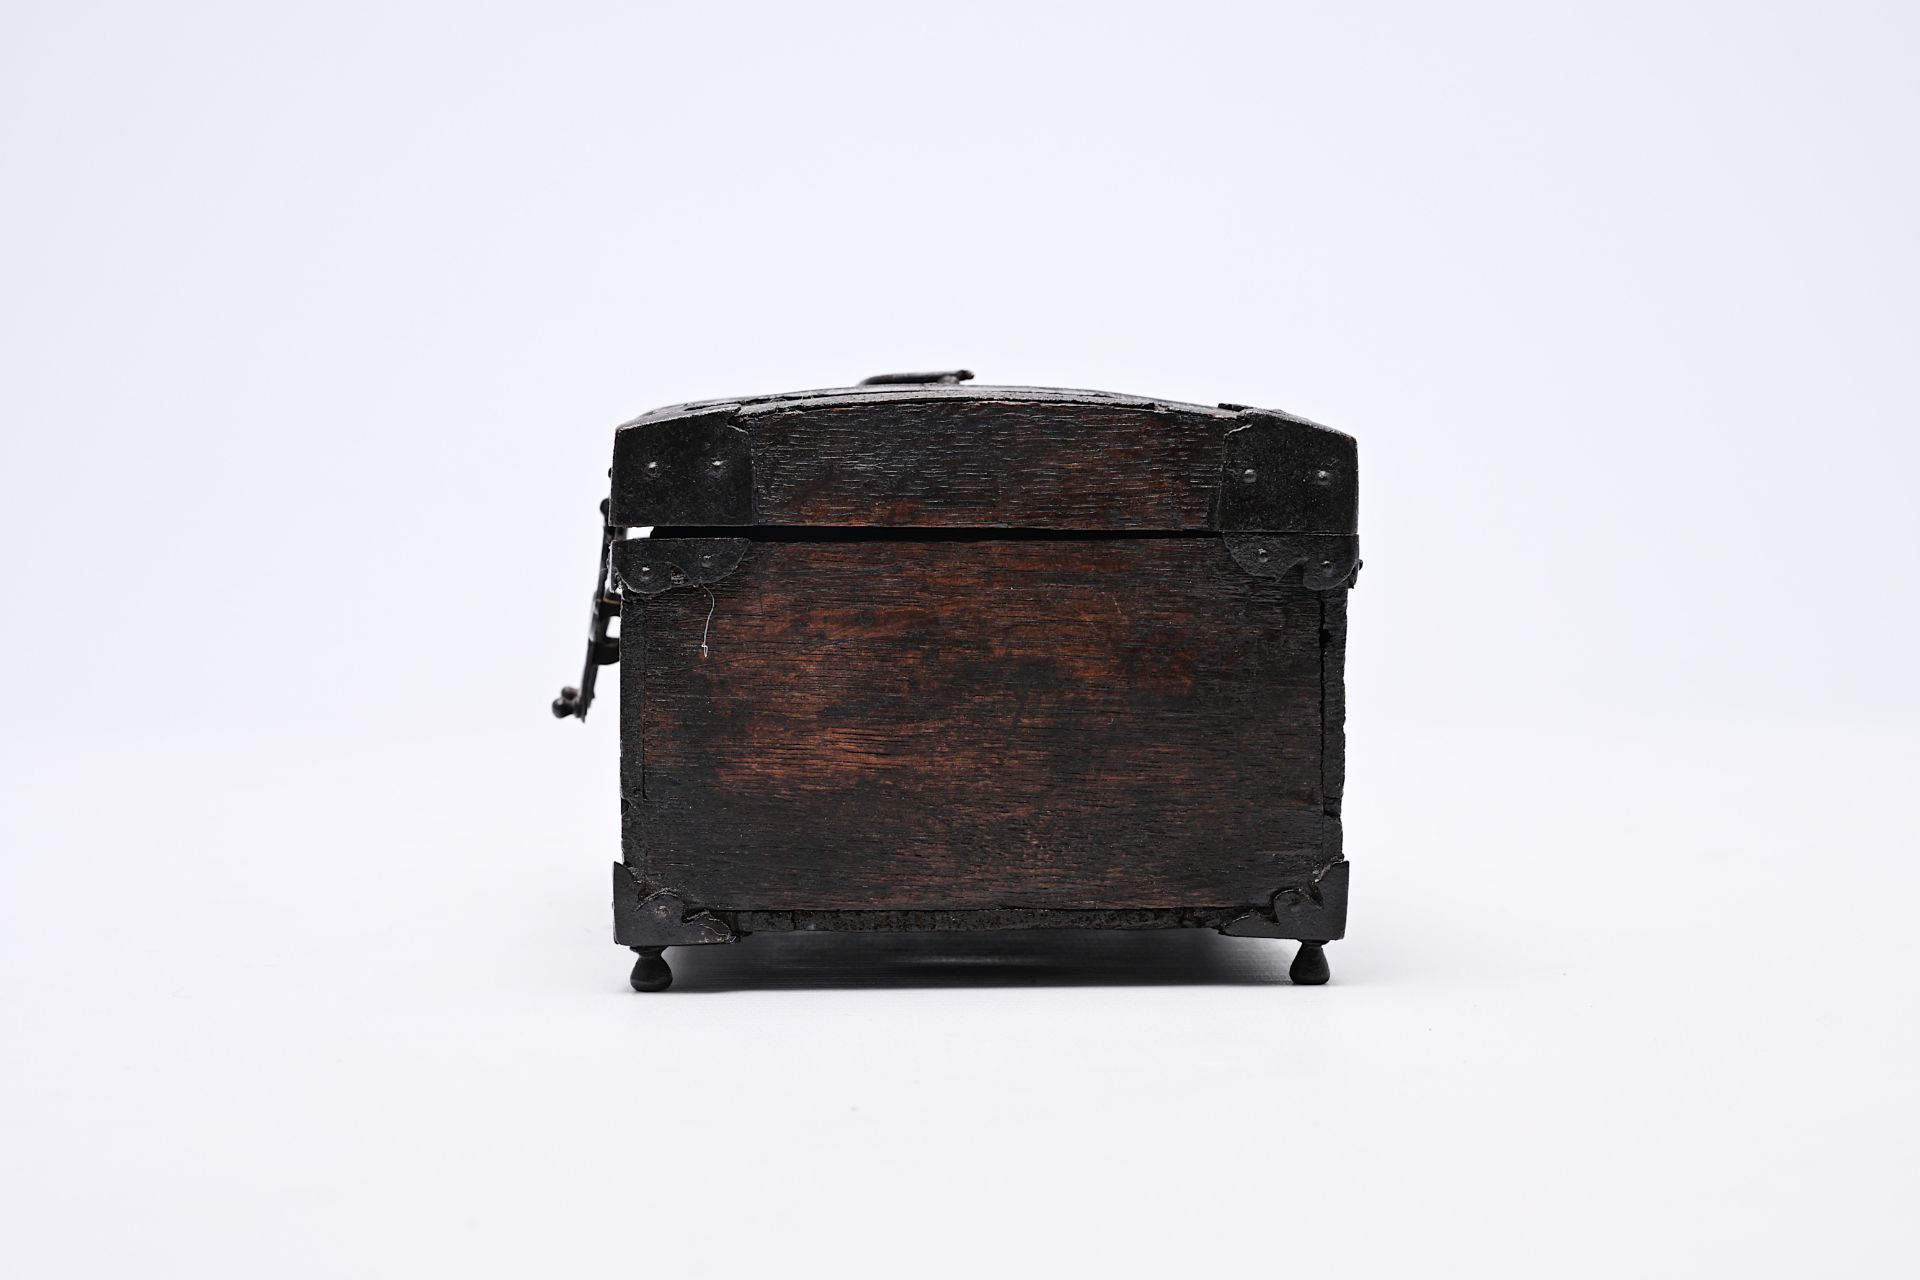 A wooden chest with iron mounts, Western Europe, 16th C. - Image 5 of 11